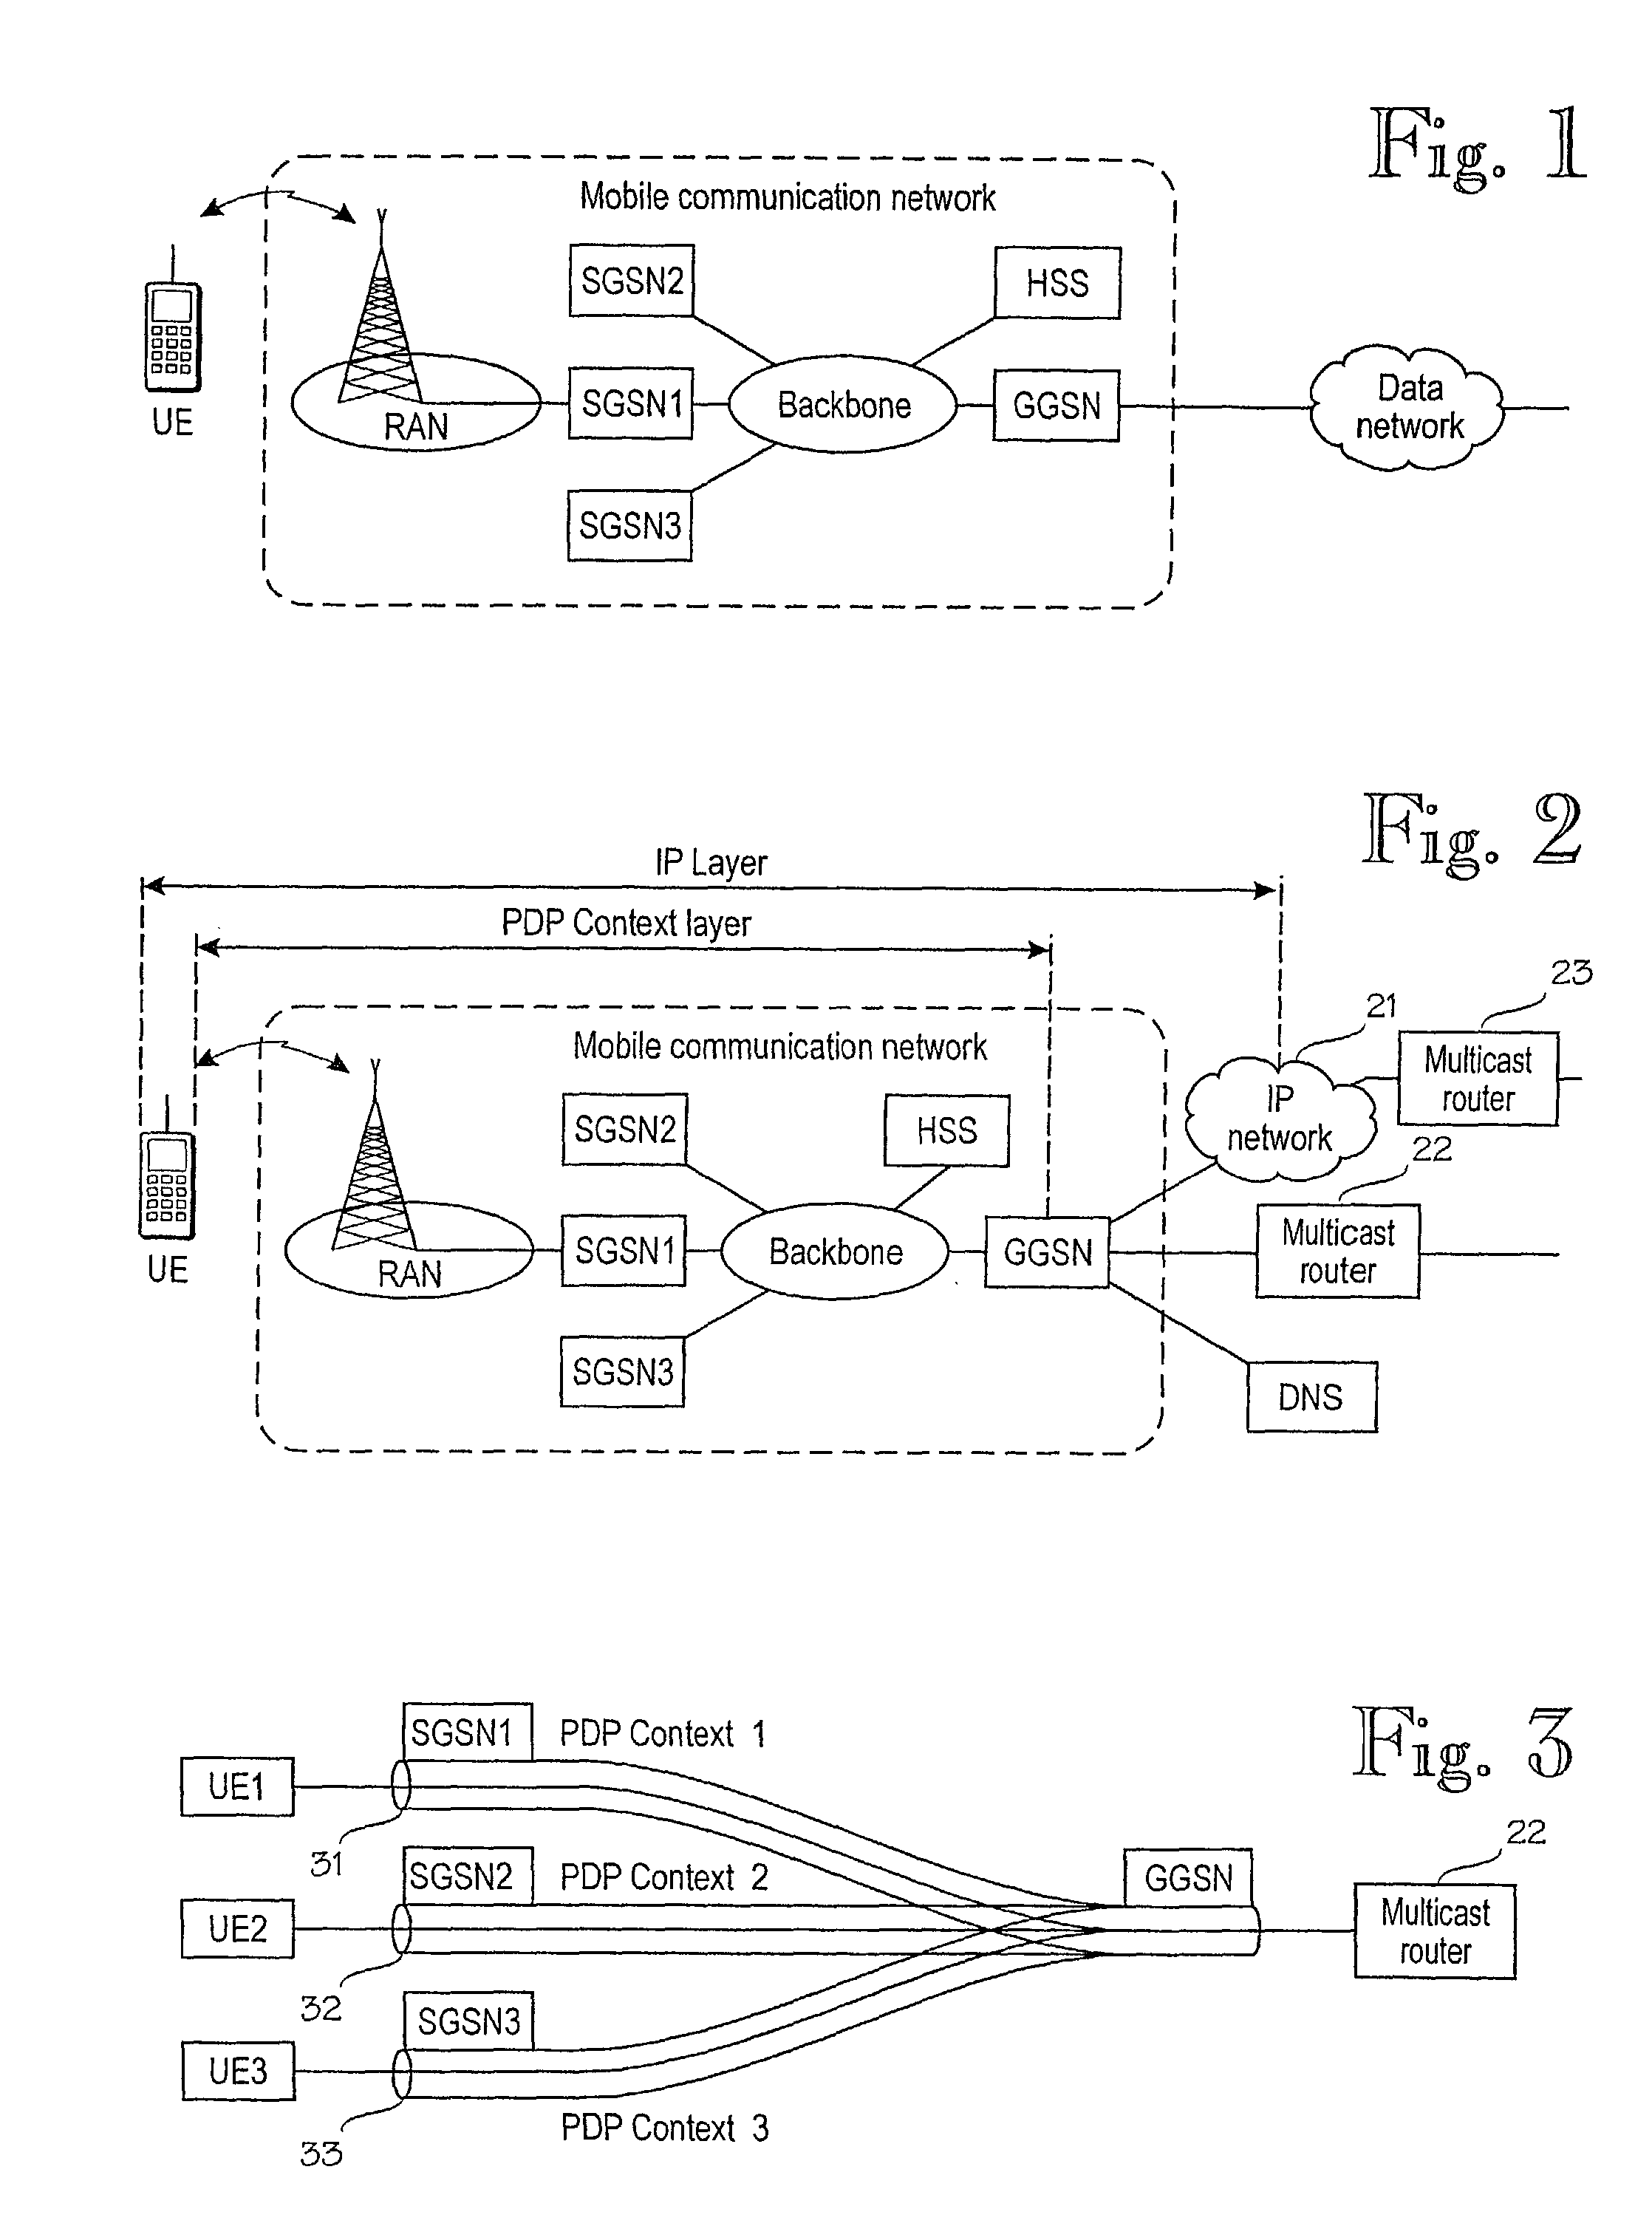 IP based voice communication in a mobile communications system